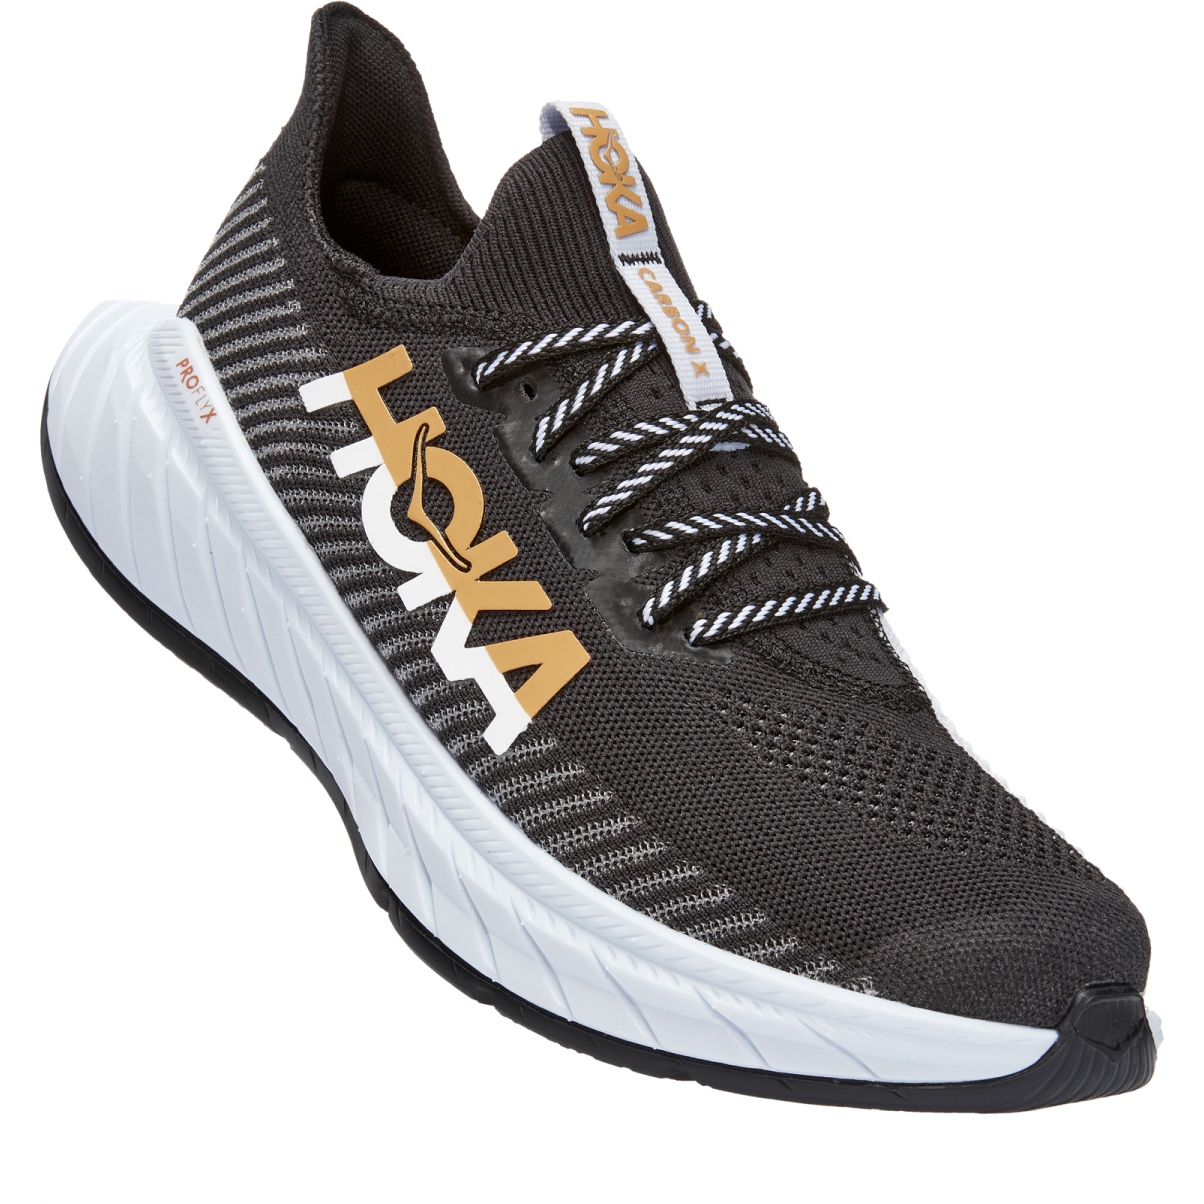 Picture of Hoka Carbon X 3 Running Shoes - black / white